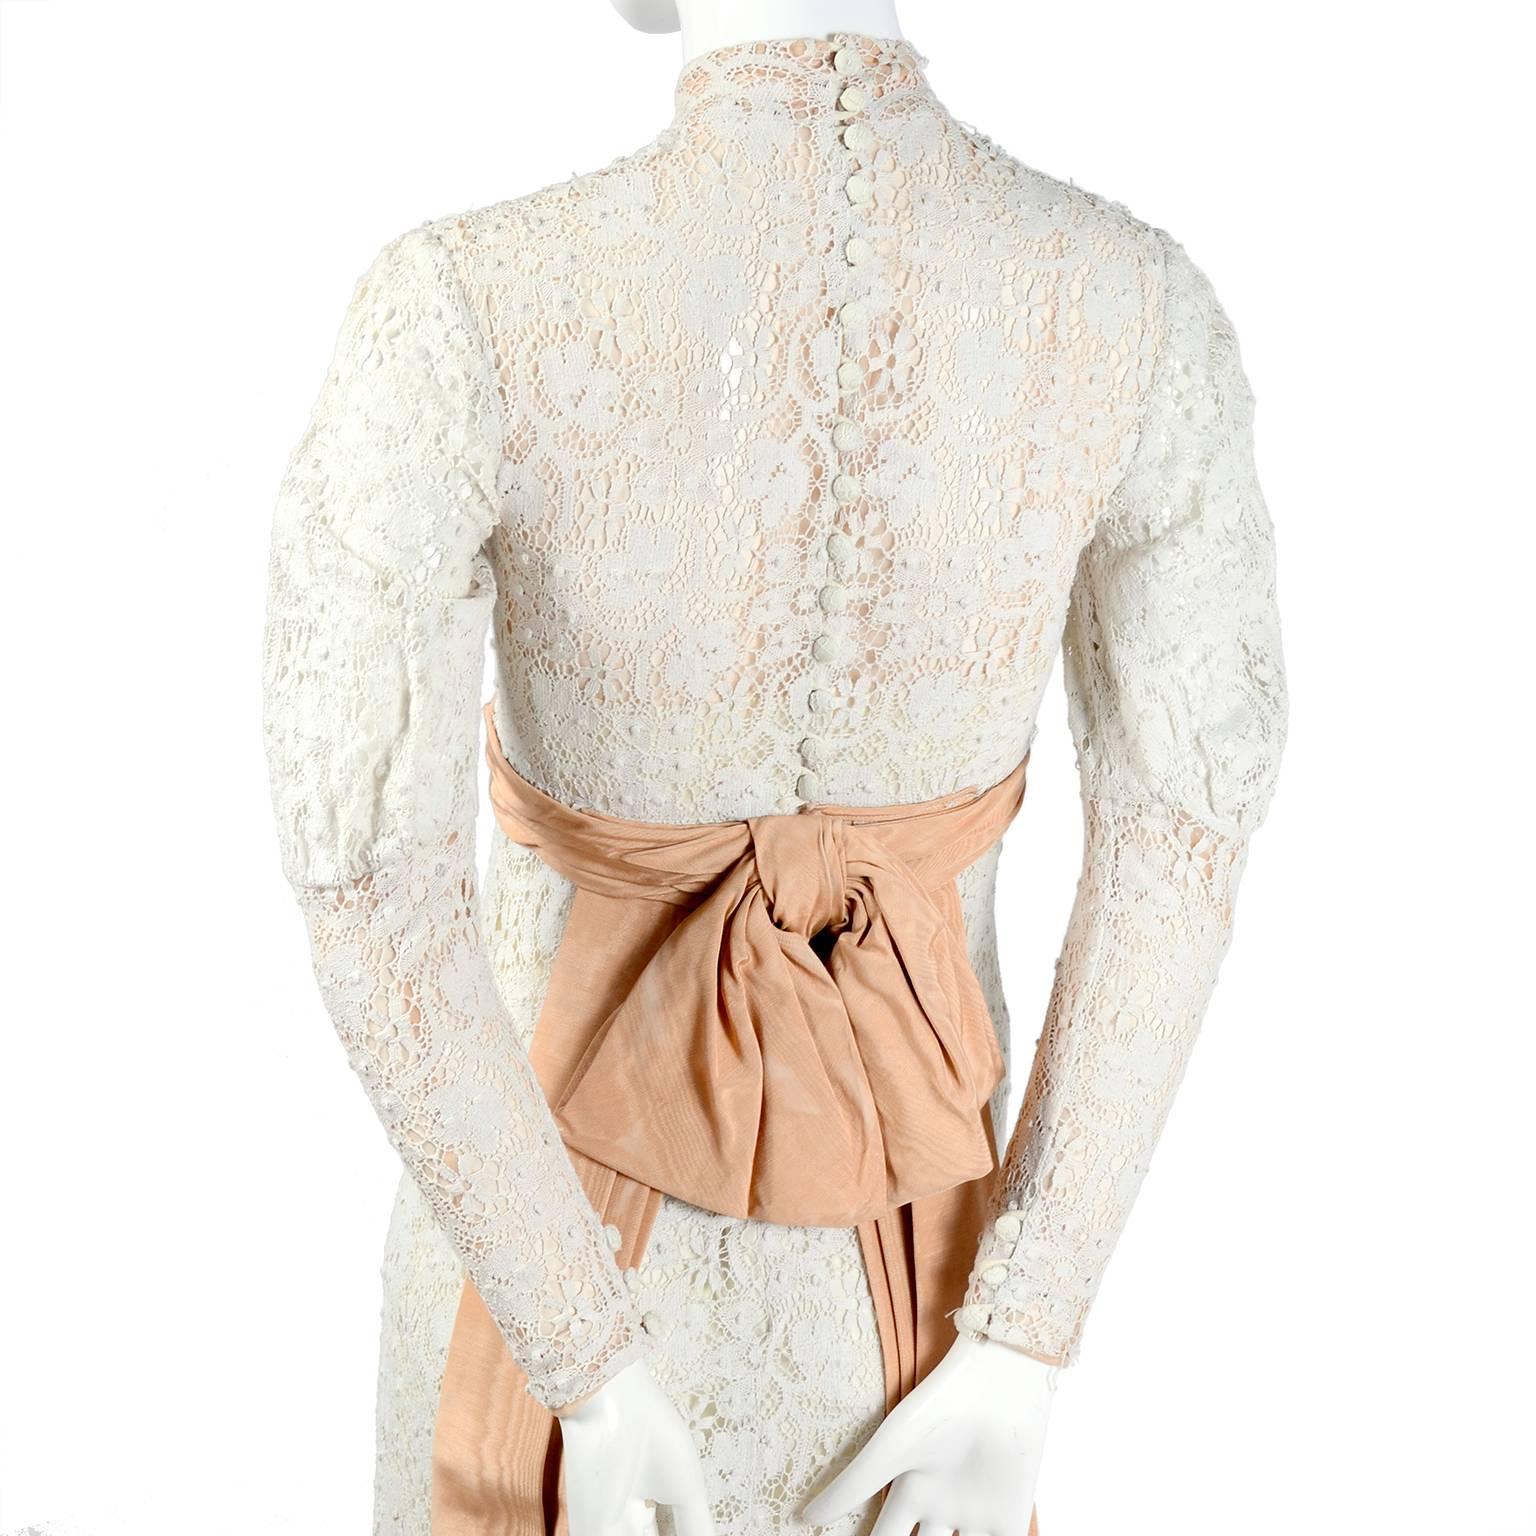 Victorian Antique Crochet Lace Vintage Dress w/ High Collar Wedding Gown Size 2 For Sale 5